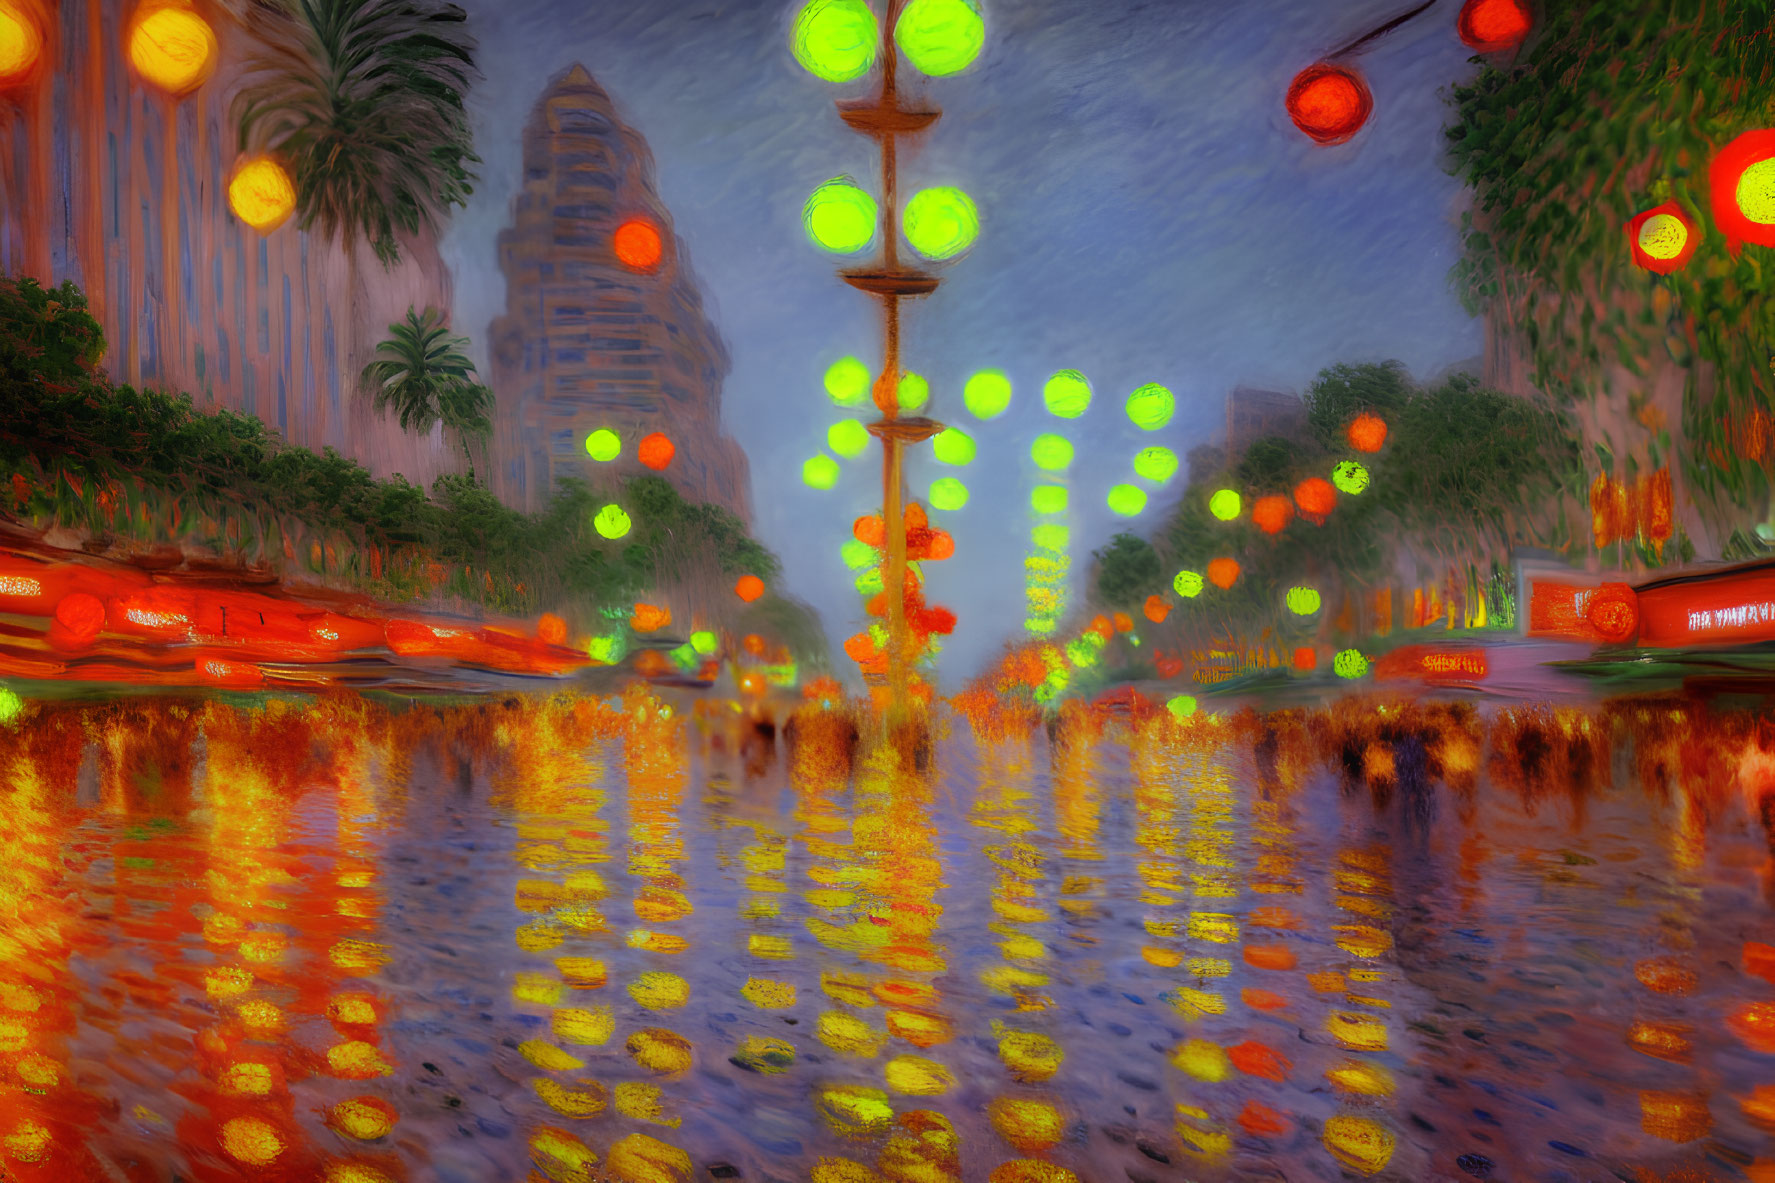 Impressionist-style city street painting at twilight with blurry light reflections.